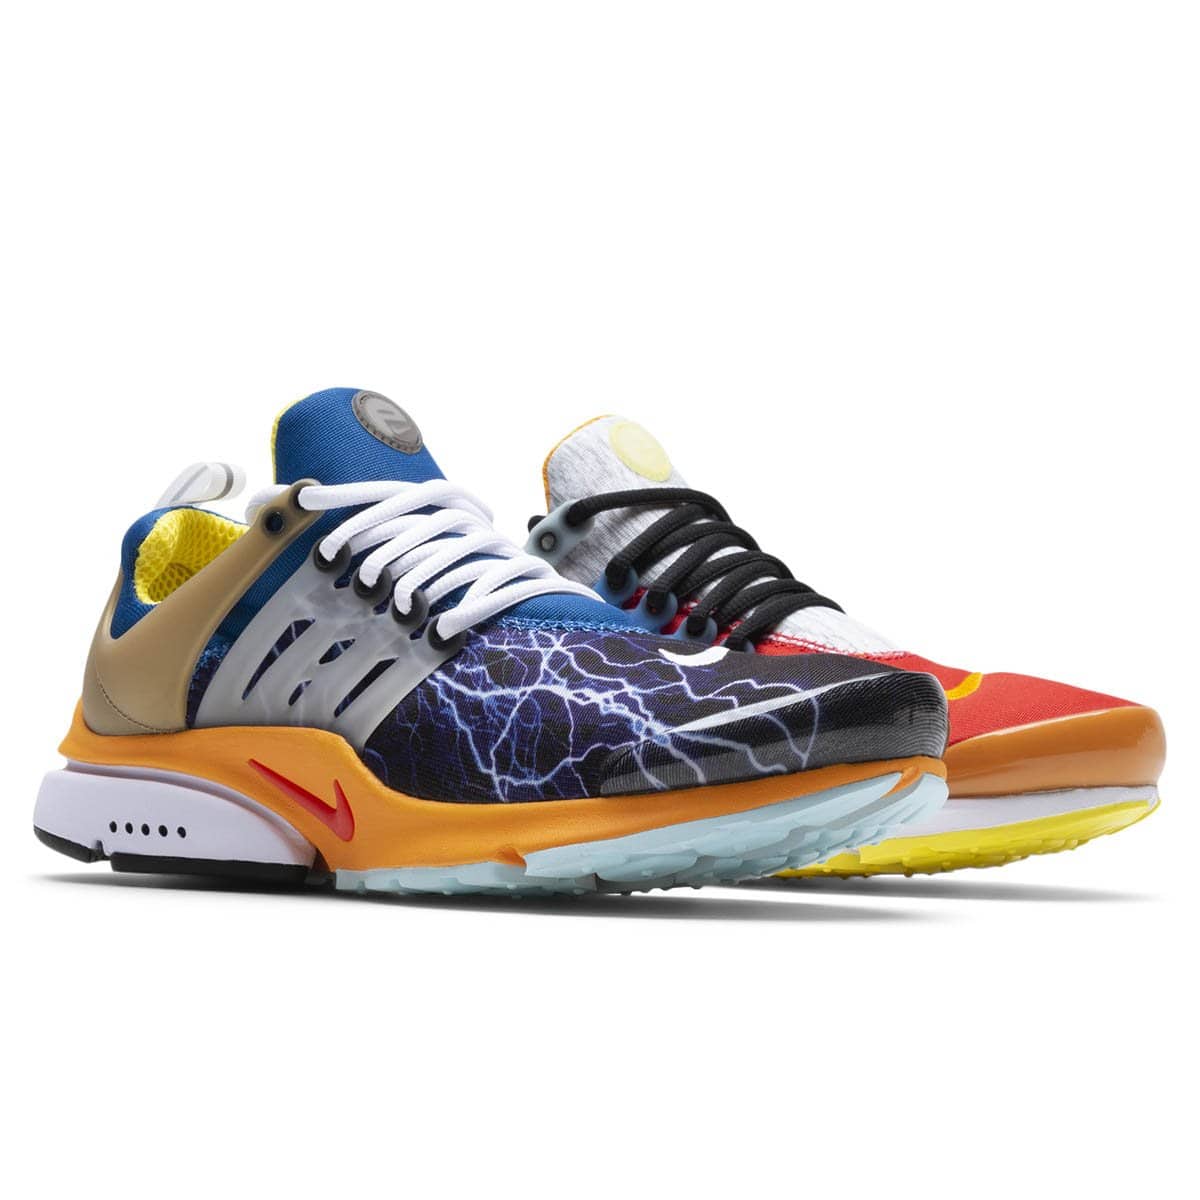 Nike Athletic AIR PRESTO "WHAT THE"